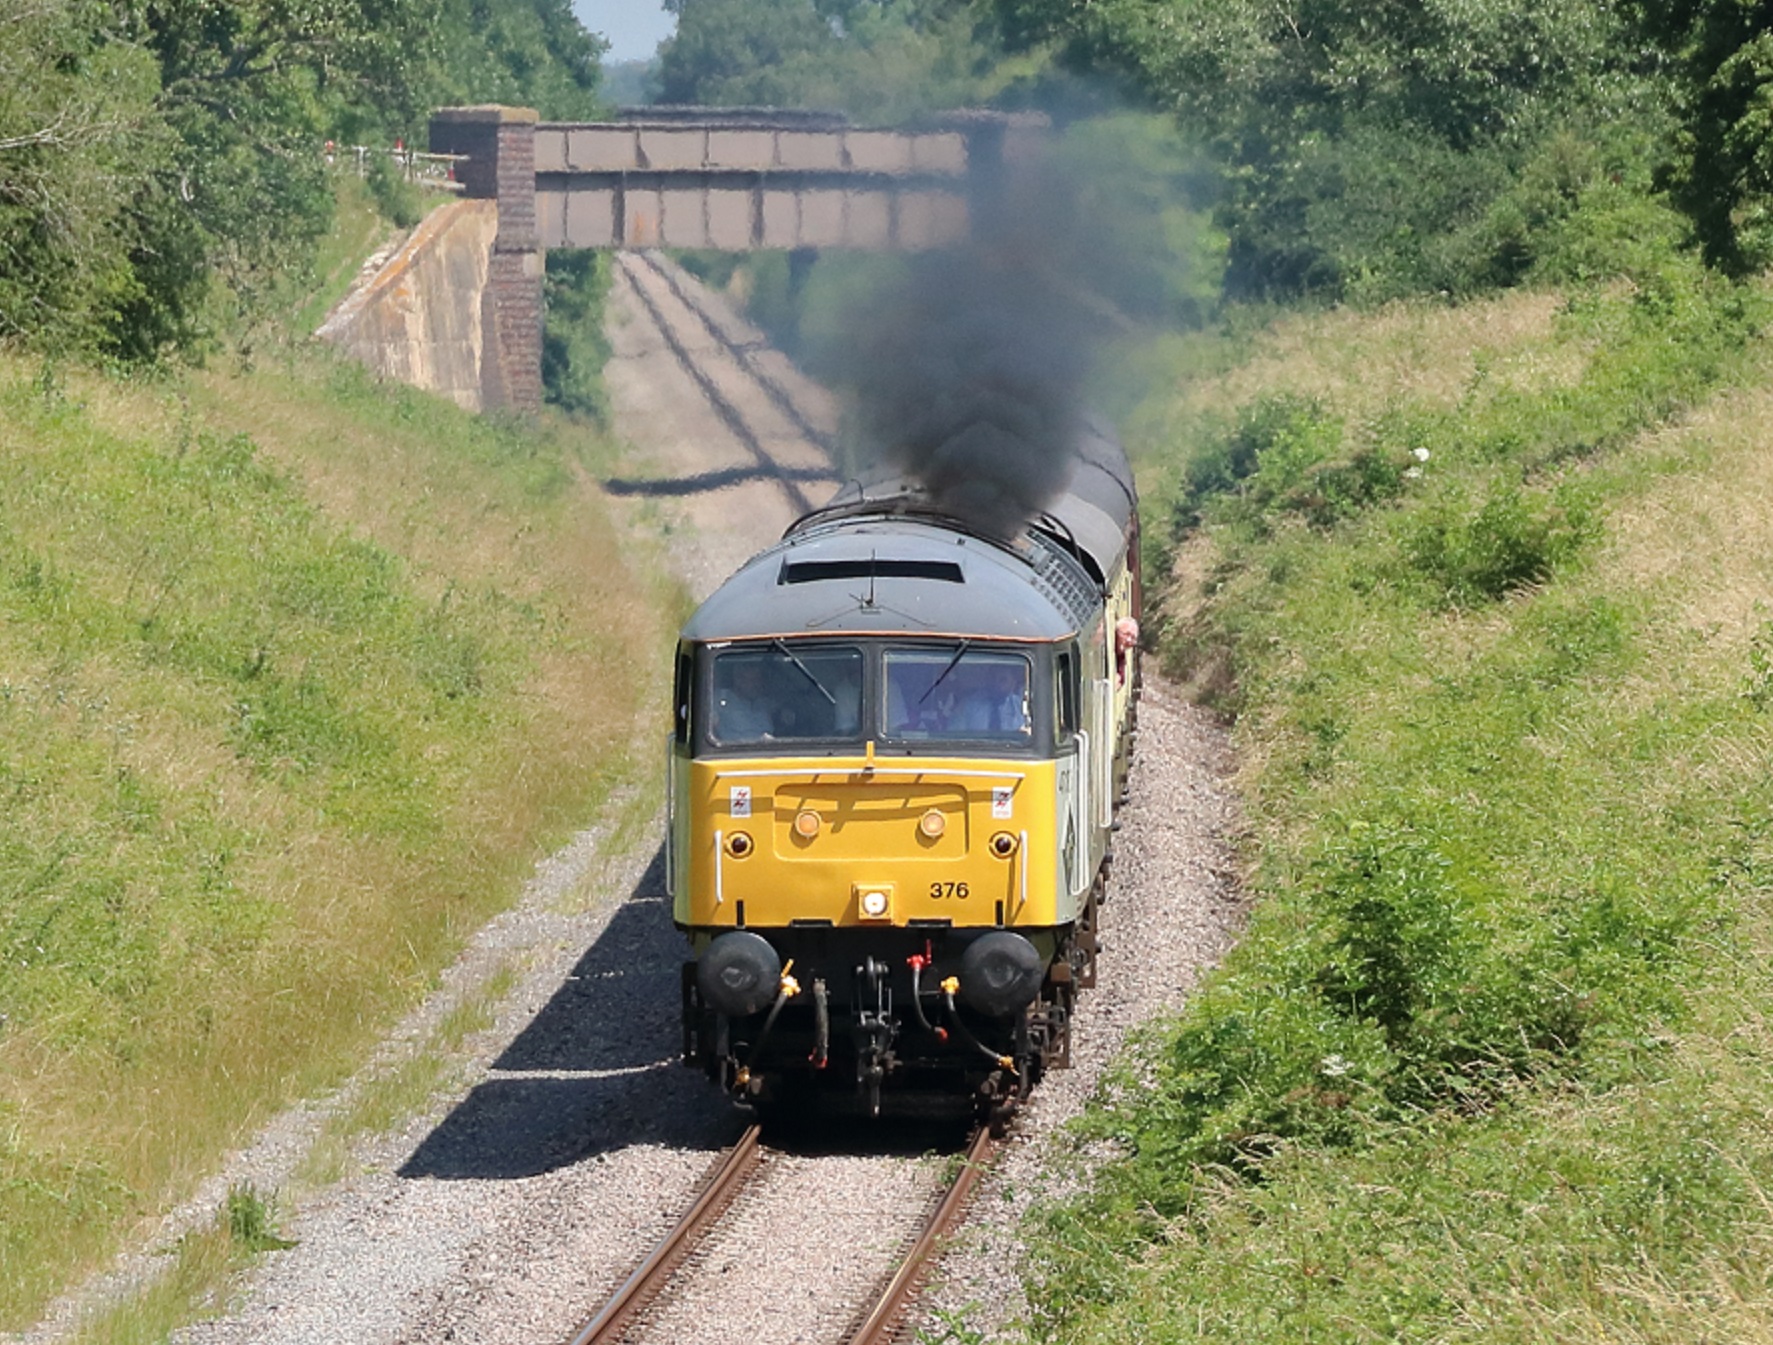 47376 powers up near Stanton on 16 July 2021. Pic by A Raybould